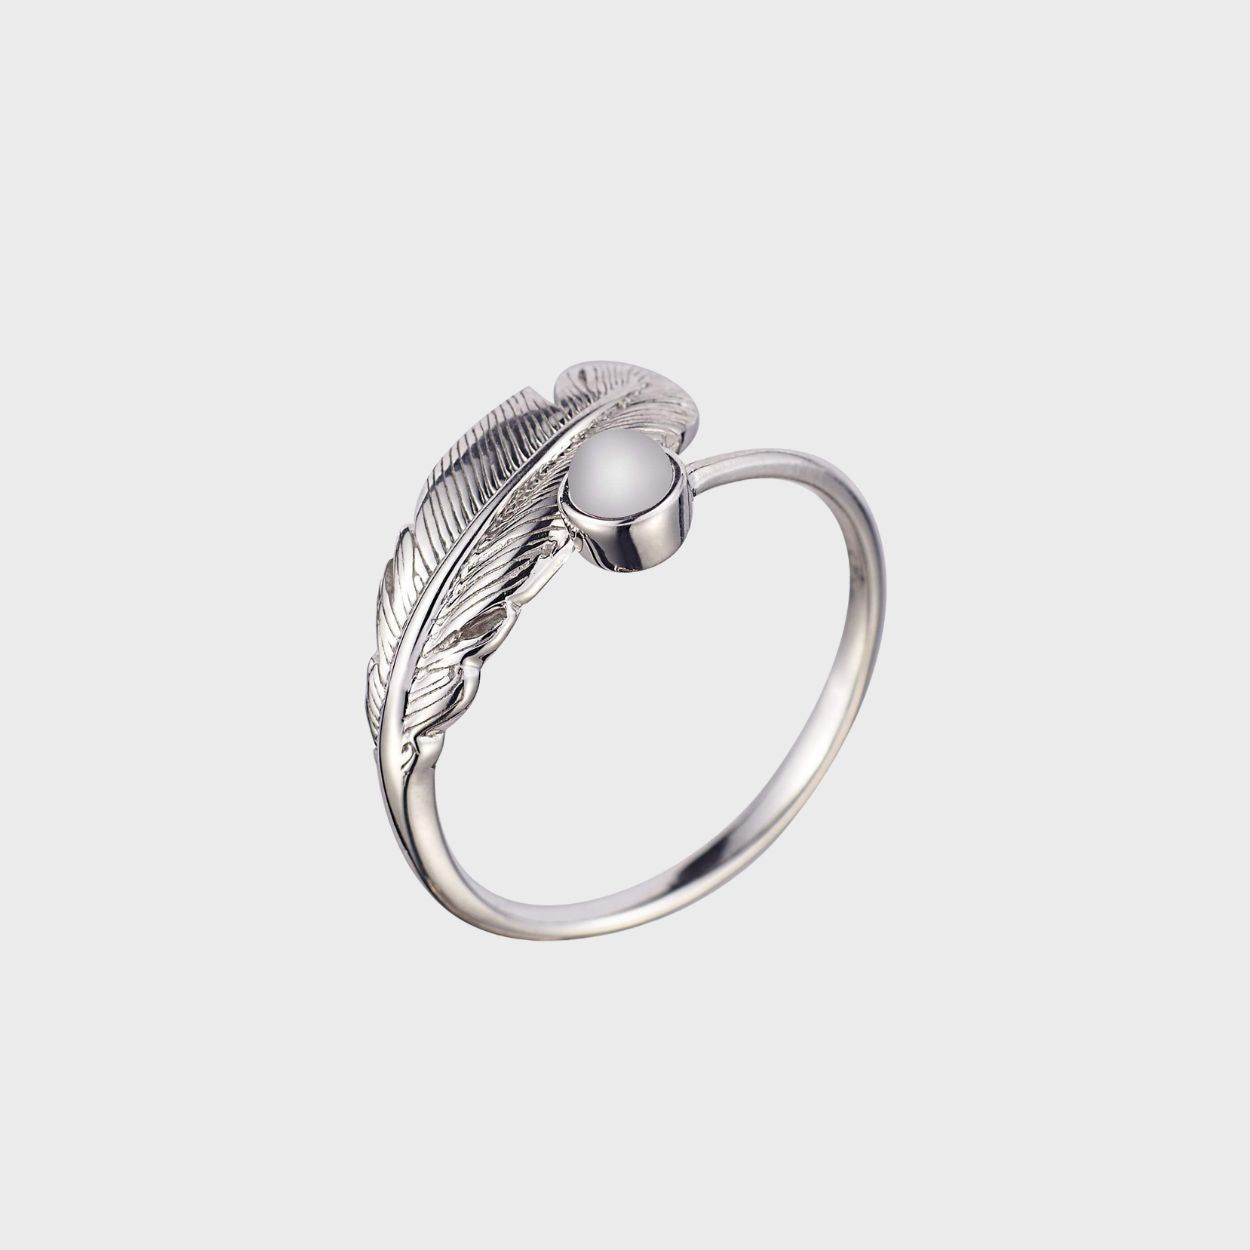 Adjustable Silver & Crystal Feather Birthstone Ring - June